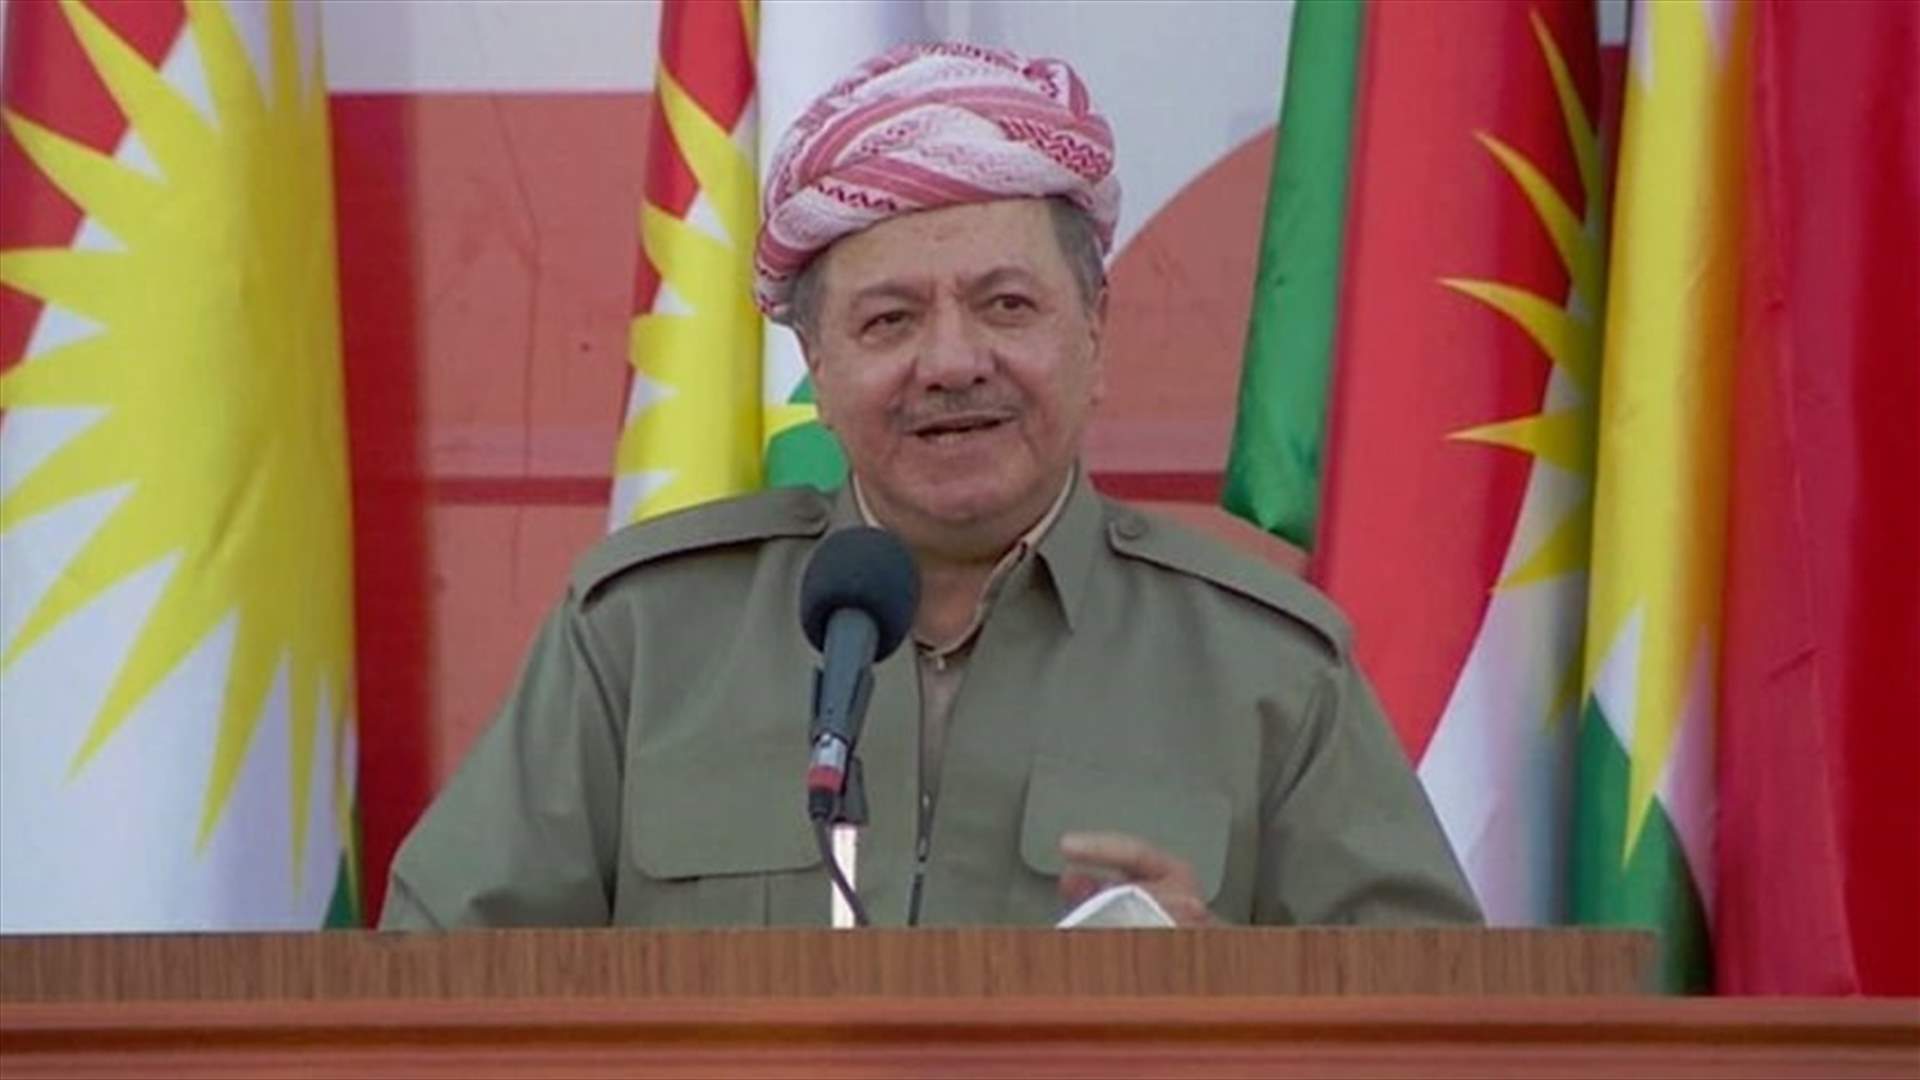 Kurds ready to pay any price for freedom, Barzani says, sticking by independence vote